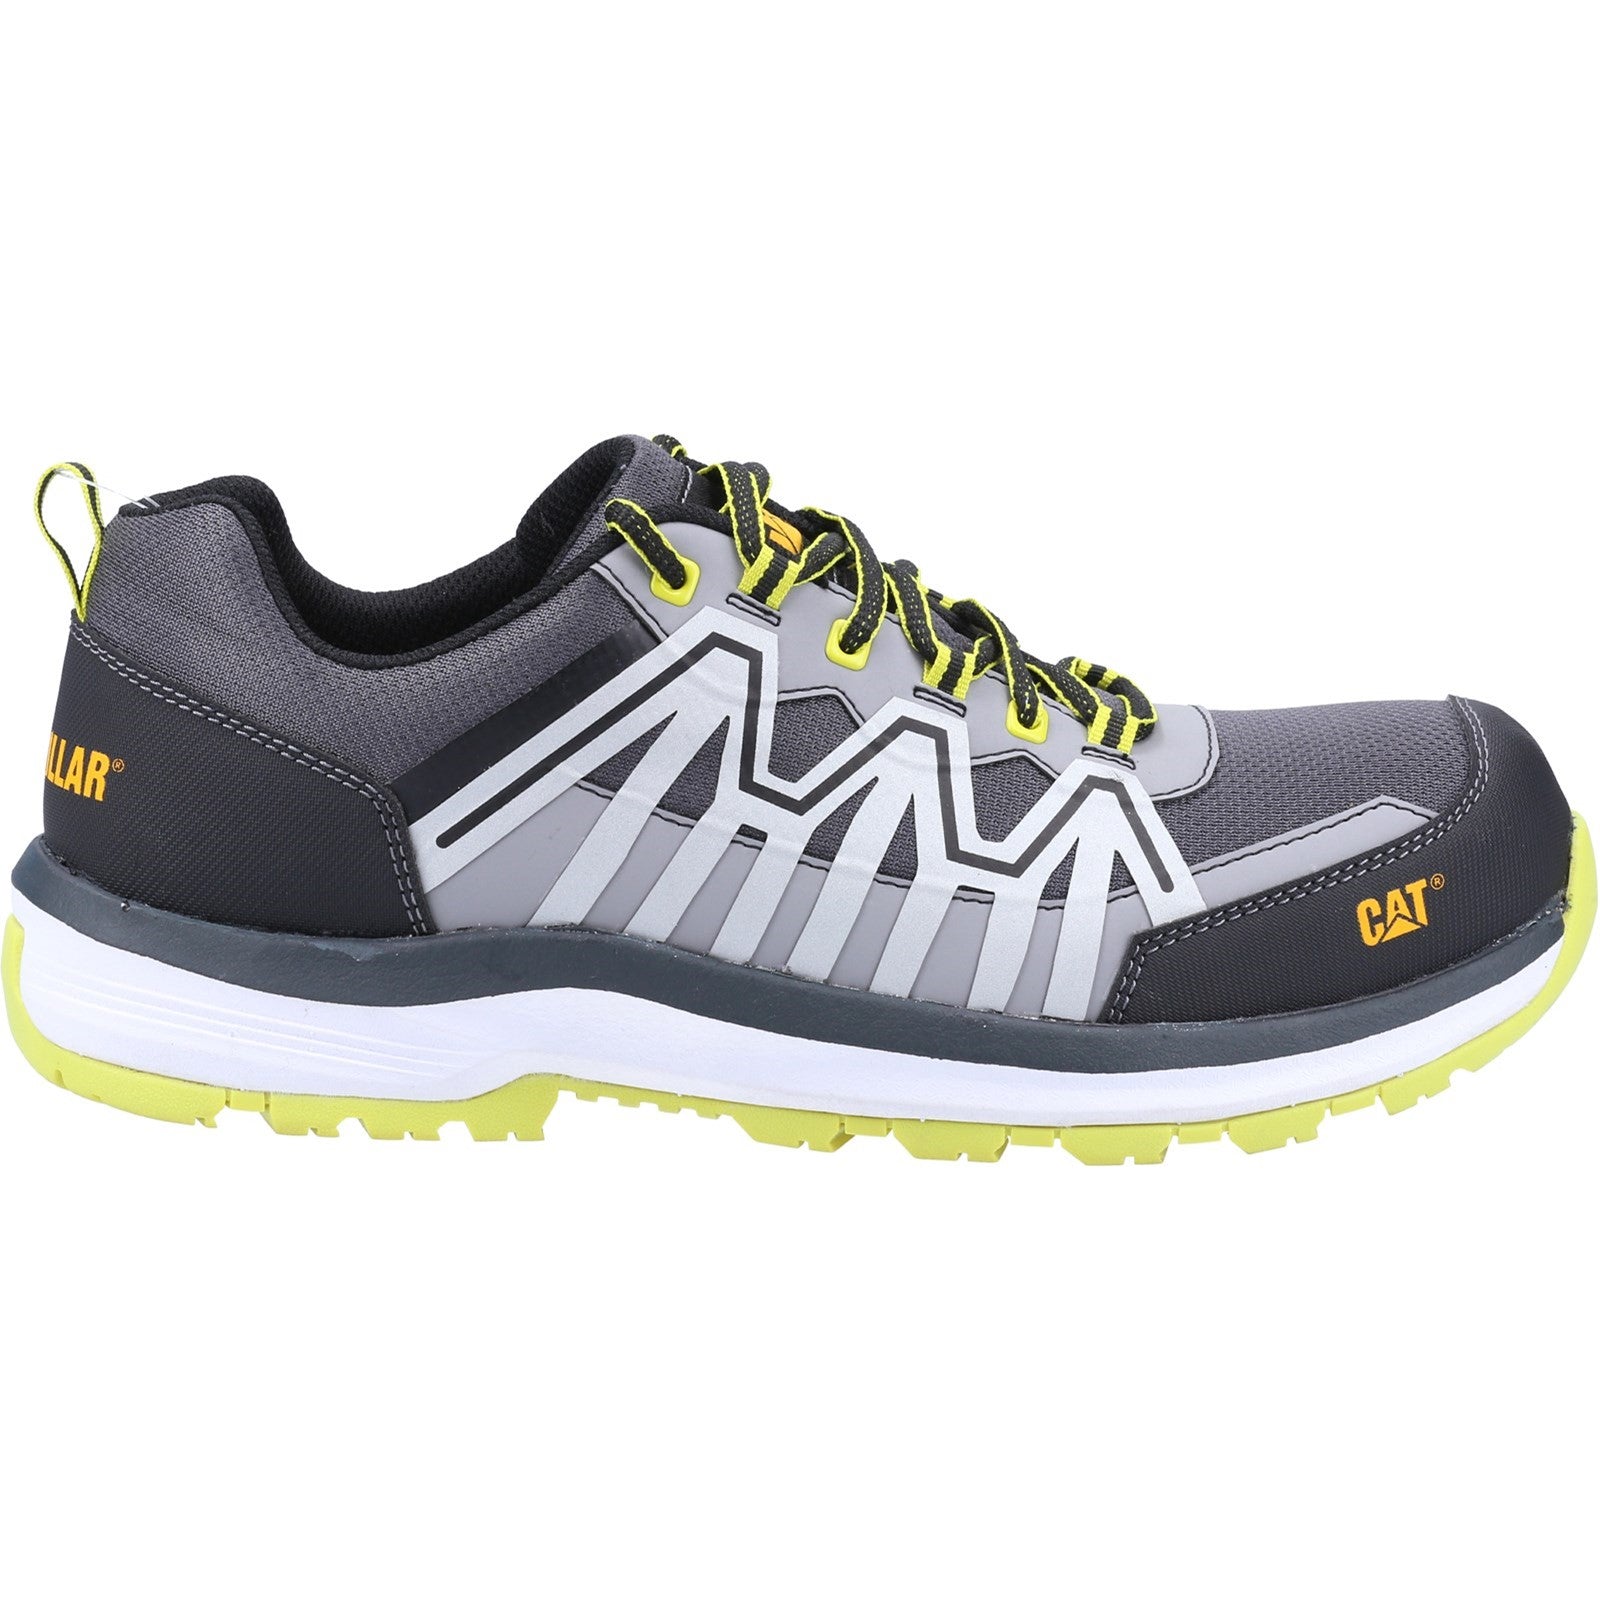 Caterpillar Charge S3 Safety Trainer in Black/Lime Green